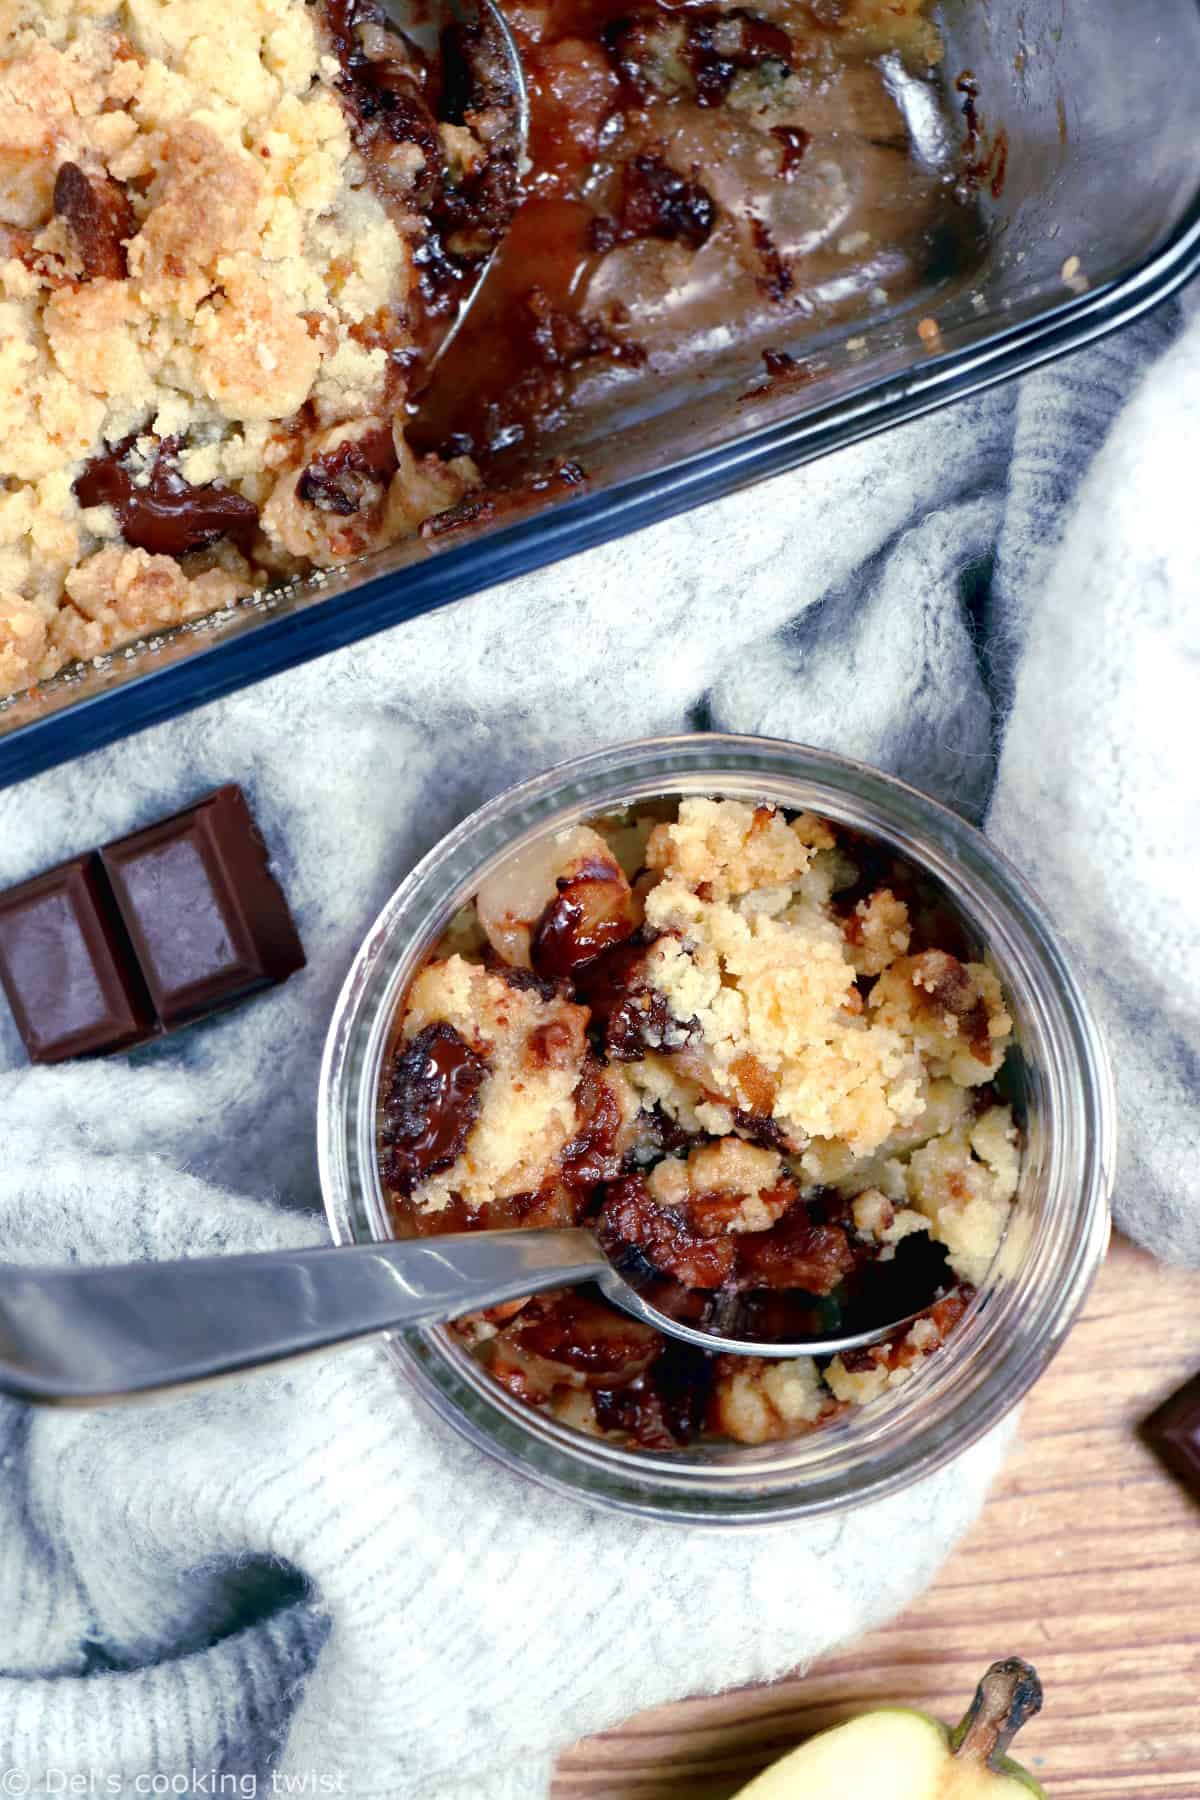 This quick pear and chocolate crumble counts among my all-time favorite desserts. With just a handful of basic ingredients, the recipe comes together beautifully every single time.